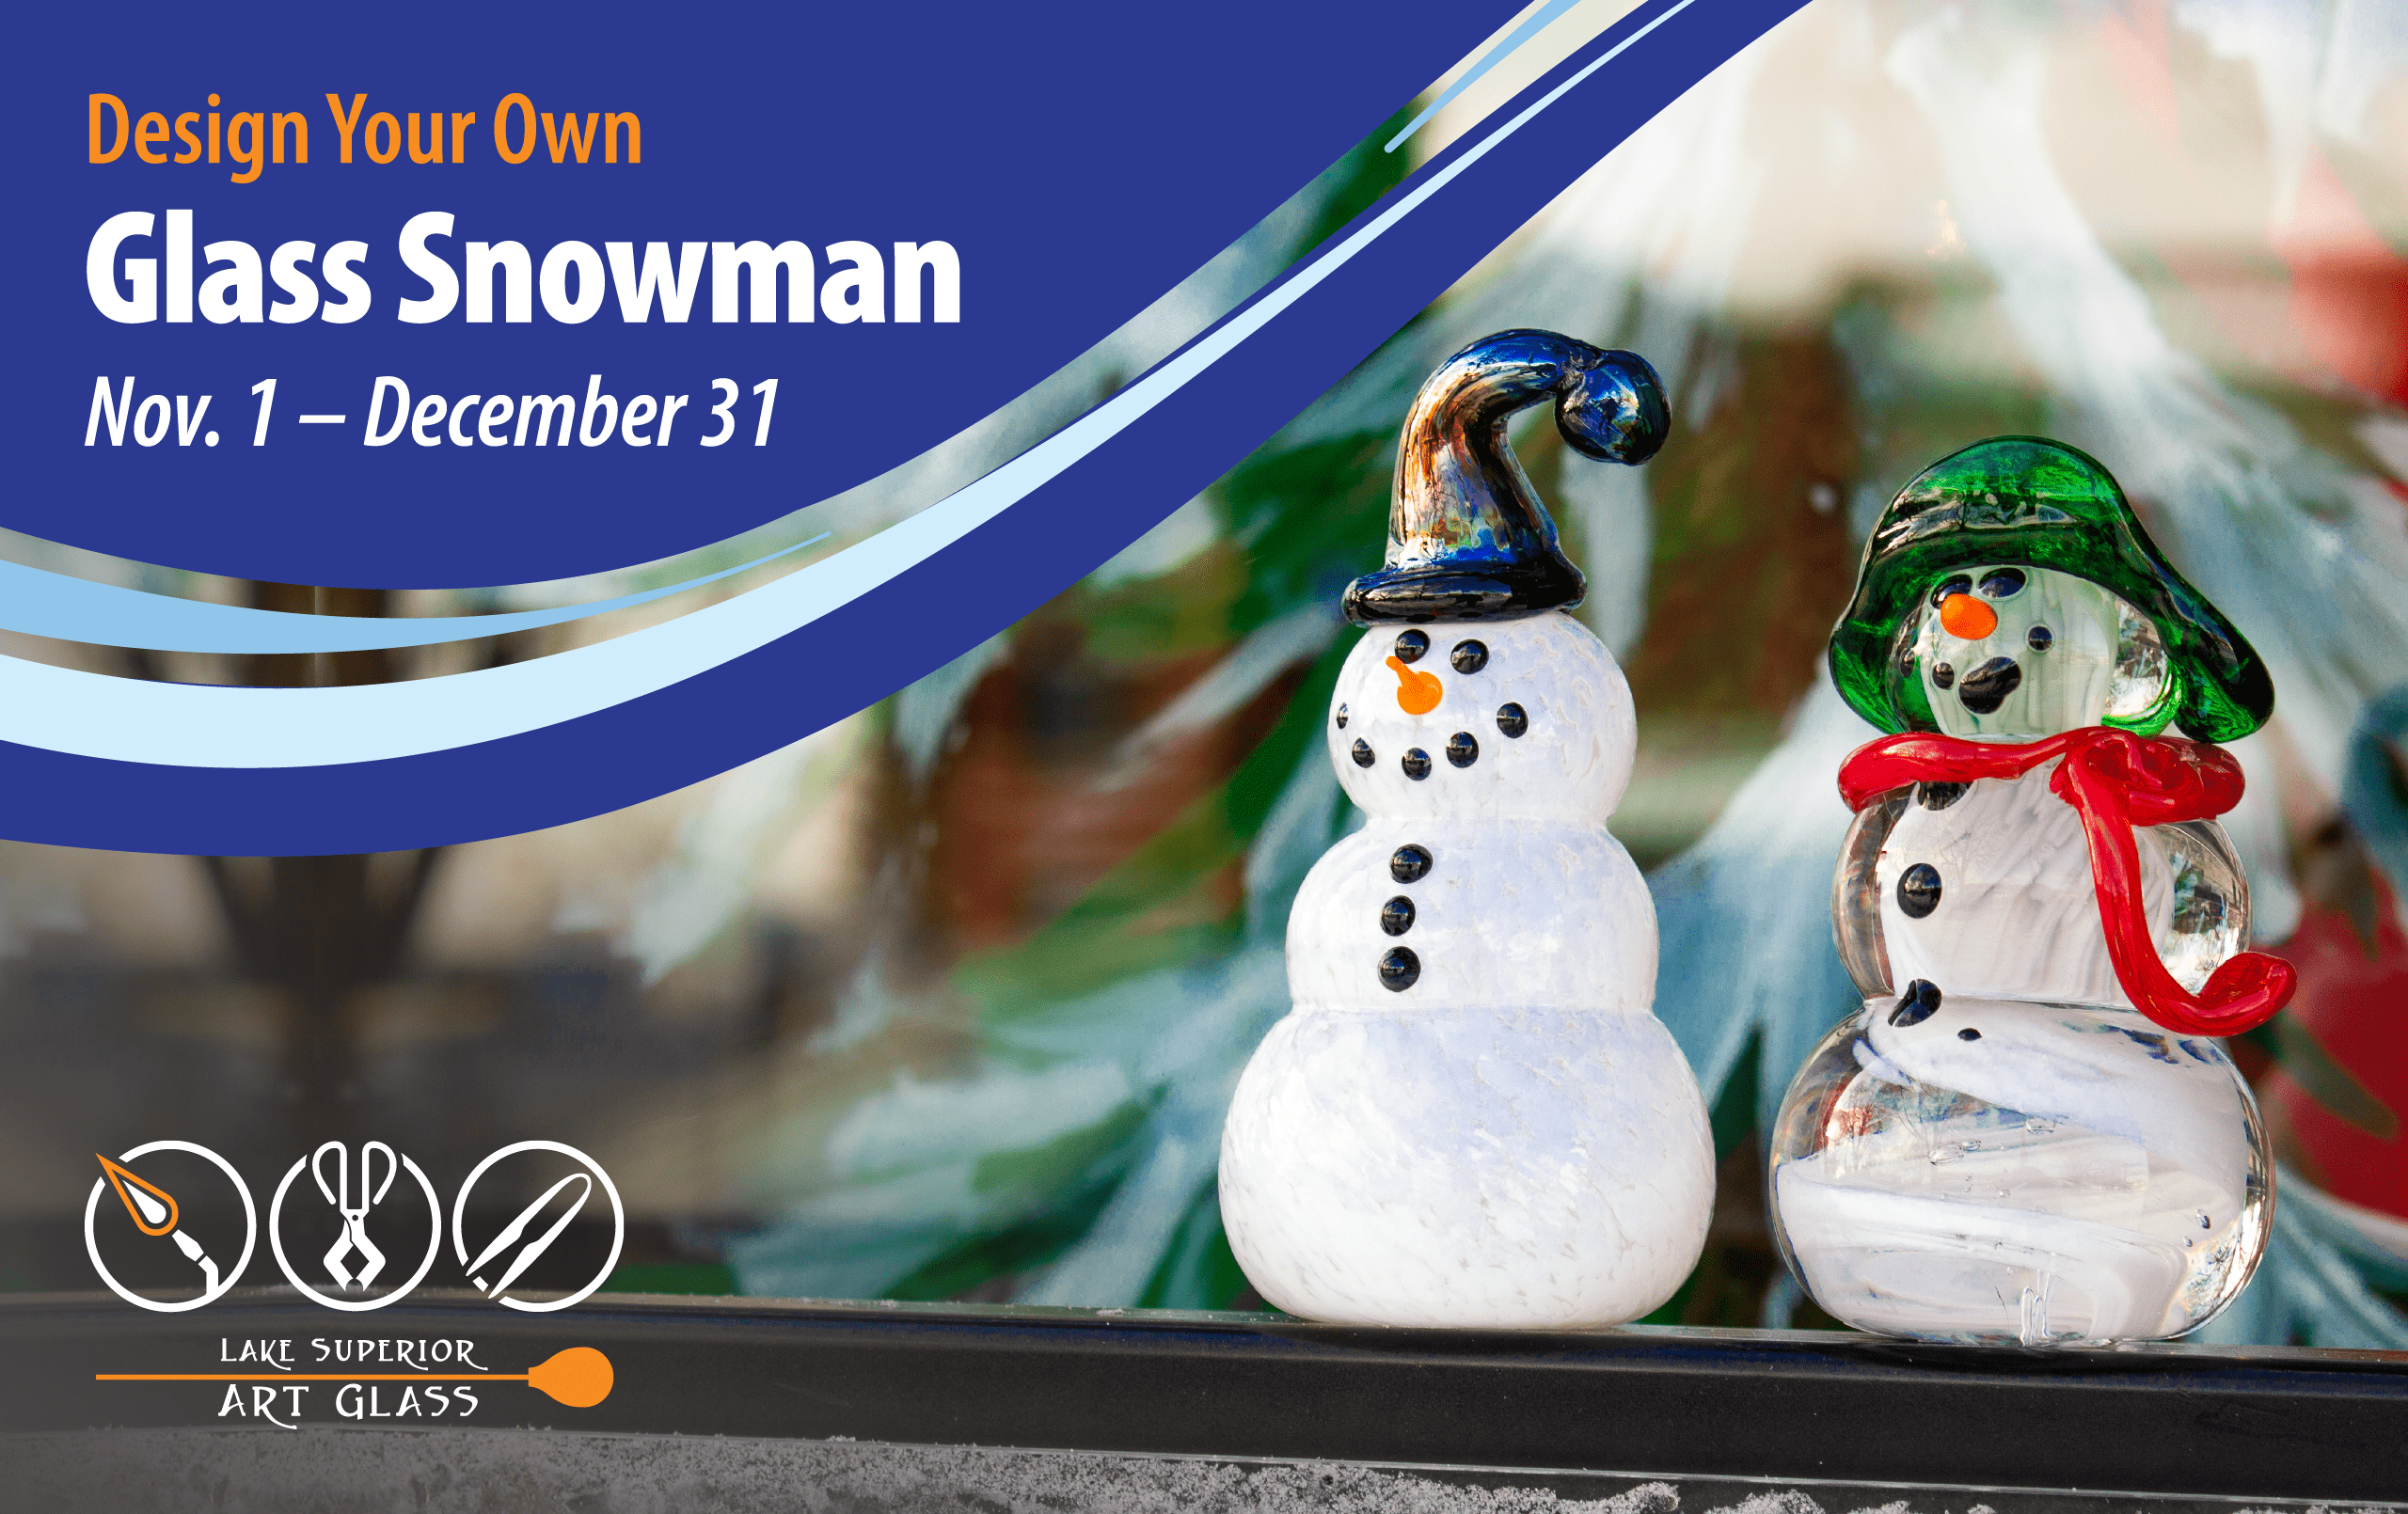 Design Your Own Glass Snowman